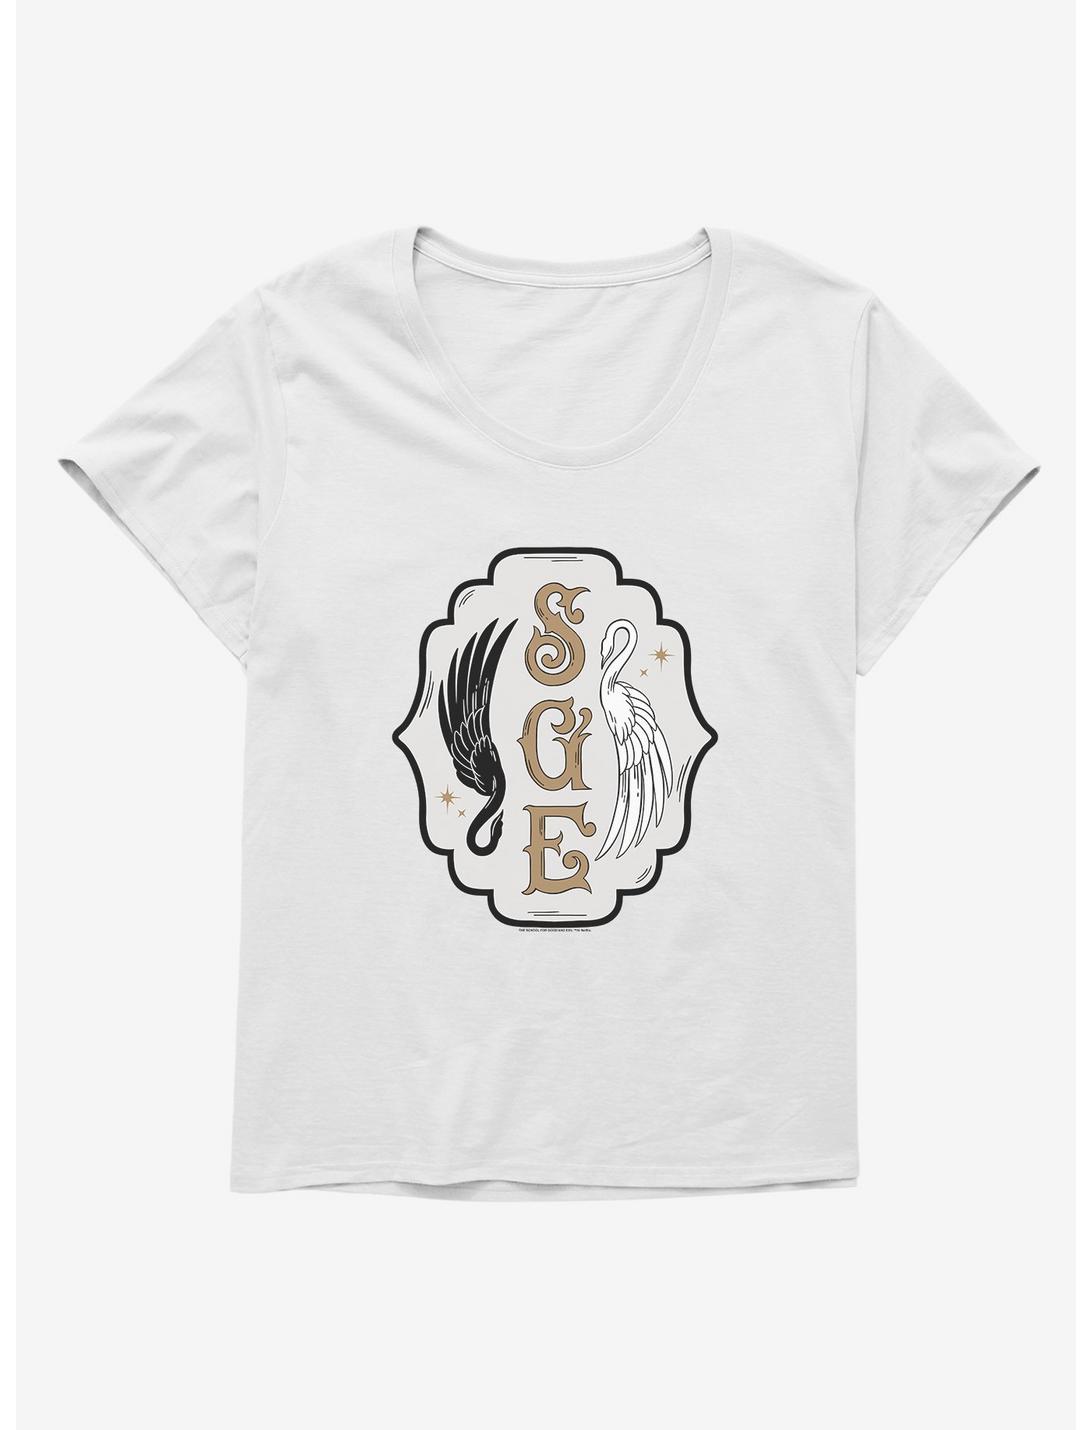 The School For Good And Evil Swan Logo Girls T-Shirt Plus Size, WHITE, hi-res